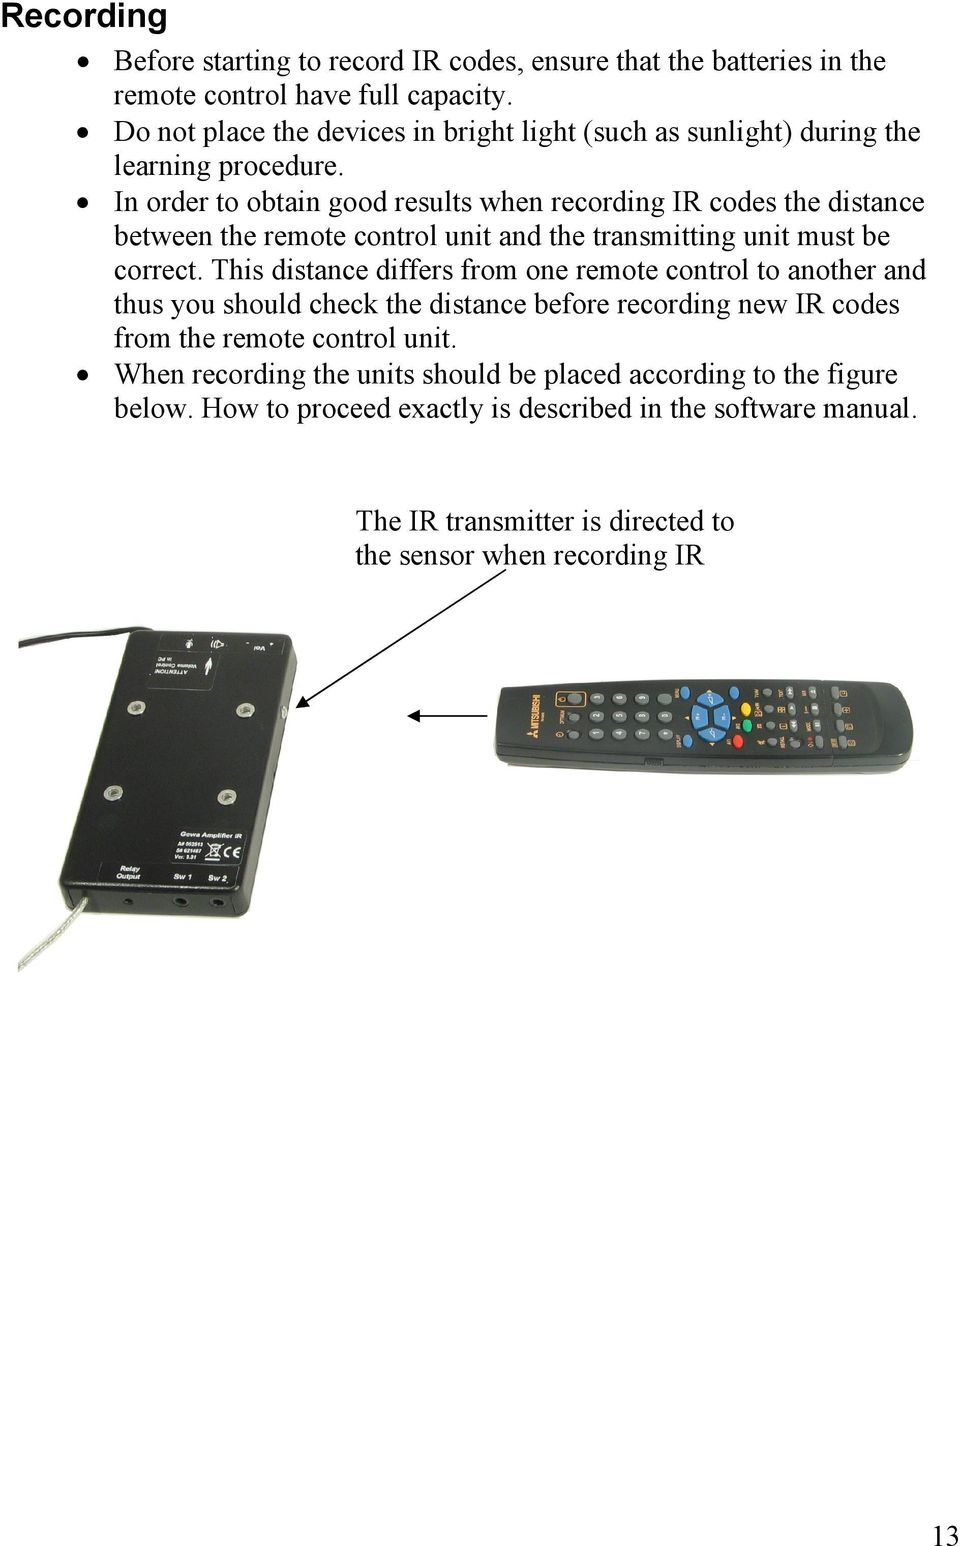 In order to obtain good results when recording IR codes the distance between the remote control unit and the transmitting unit must be correct.